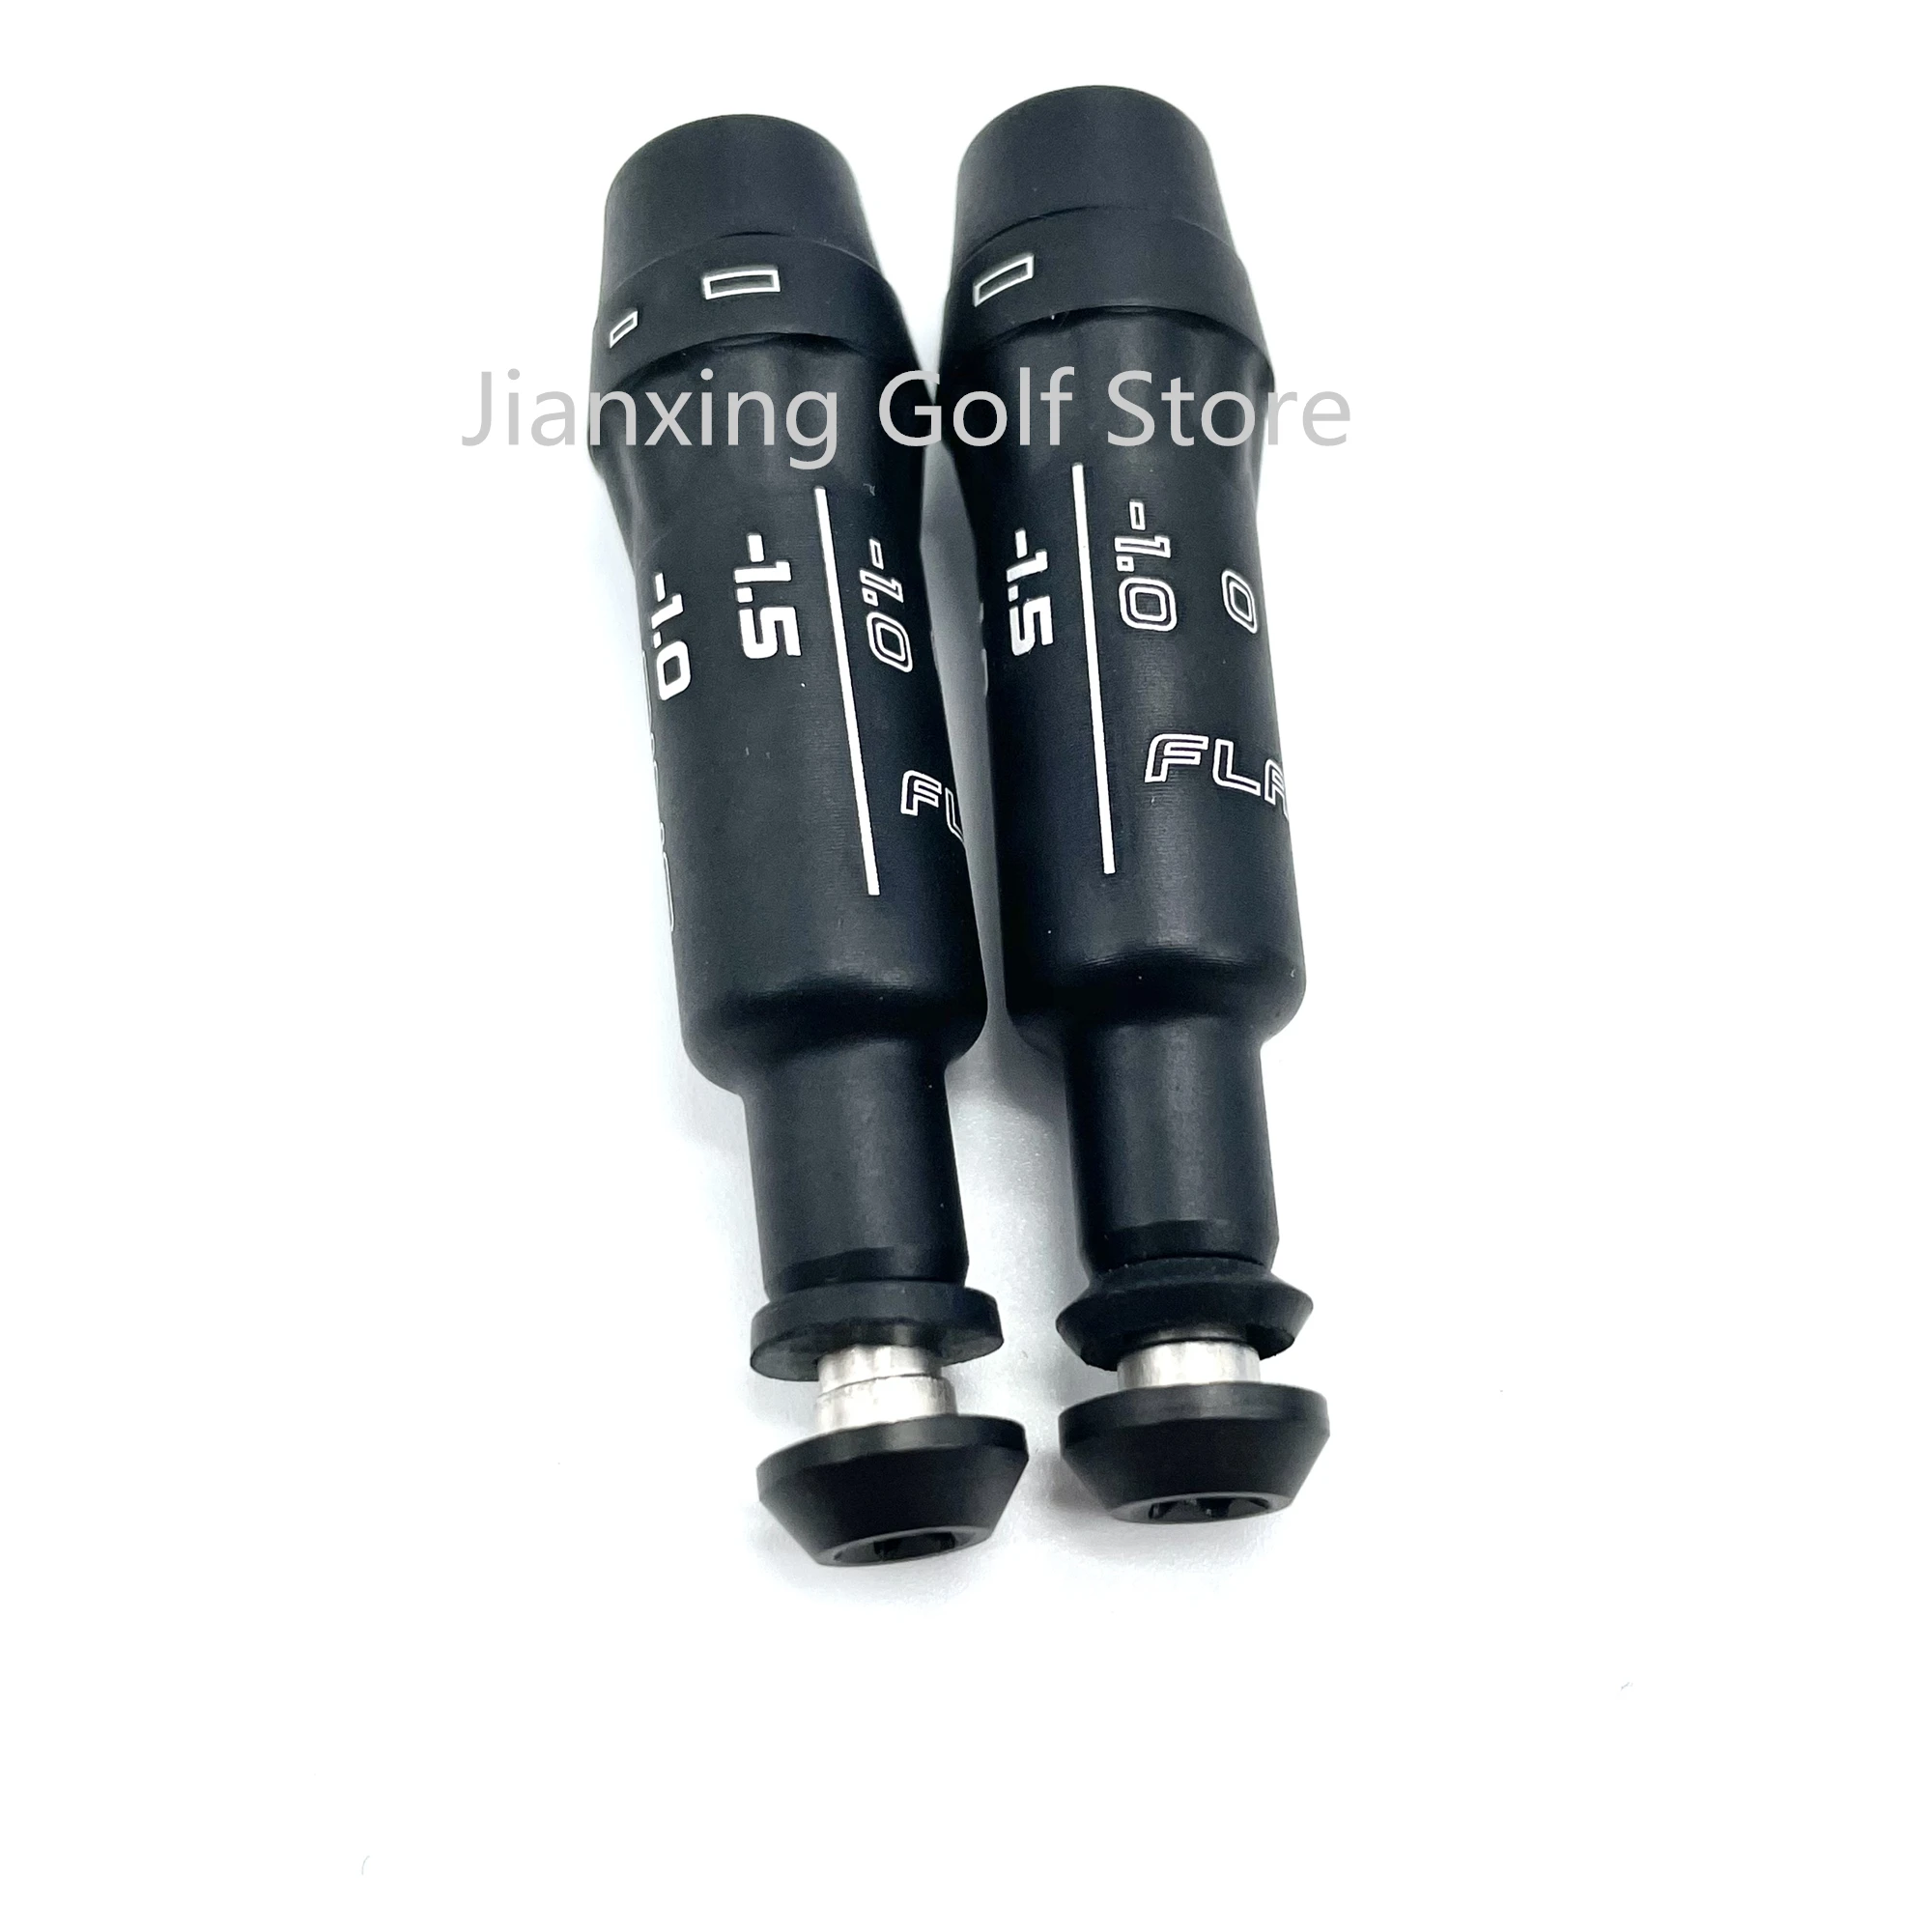 Golf Shaft Sleeve Adapter Replacement fit for Ping G410 G425 G430 Driver Fairway Wood Hybrid club head